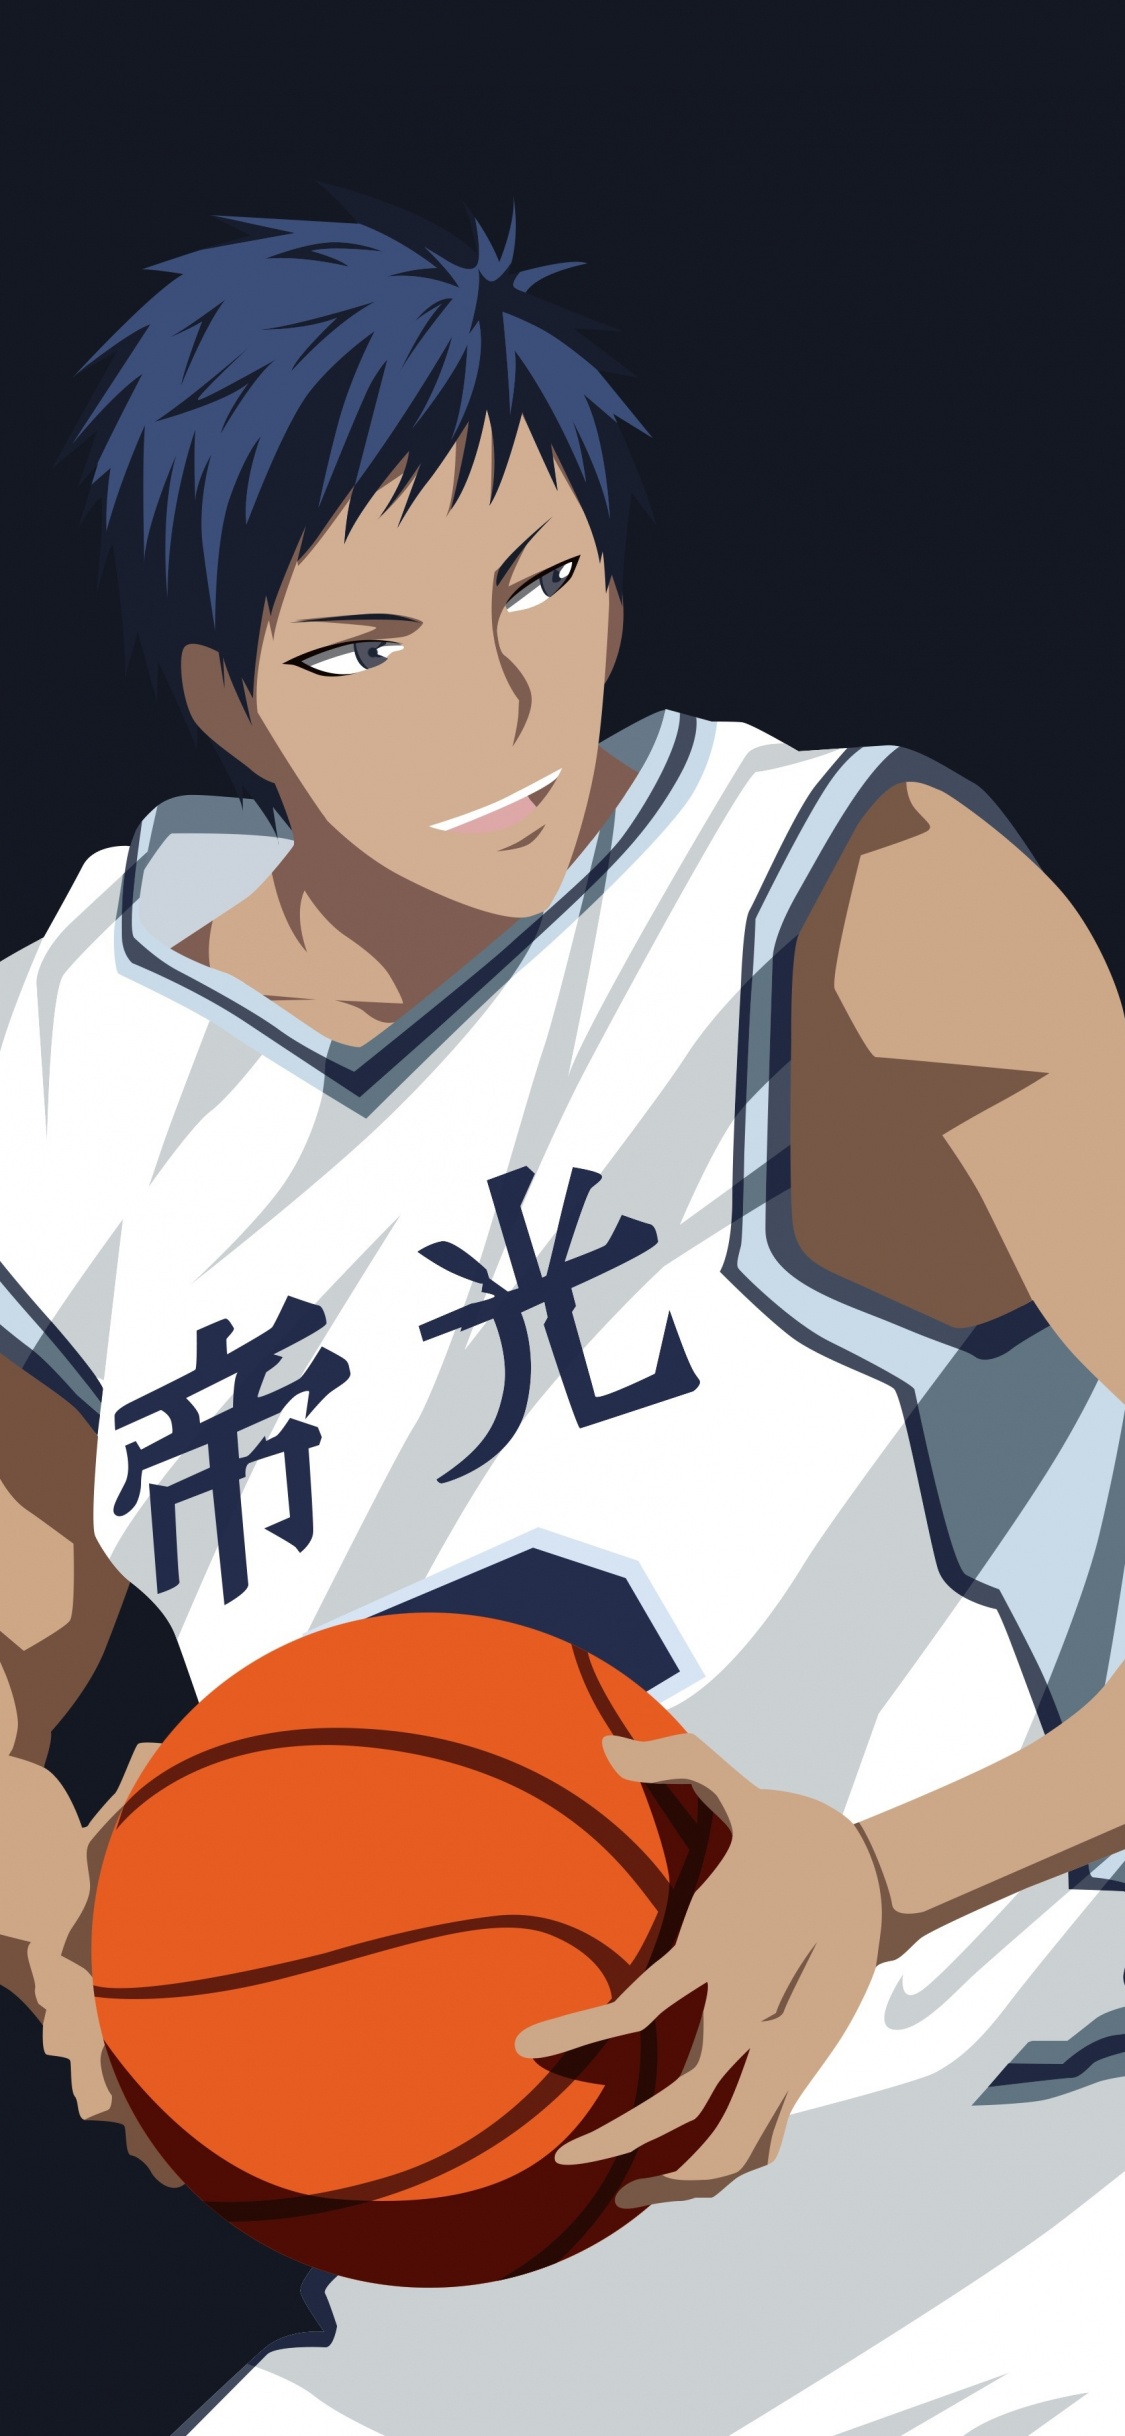 Personnage D'anime Masculin Aux Cheveux Noirs Tenant le Basket-ball. Wallpaper in 1125x2436 Resolution